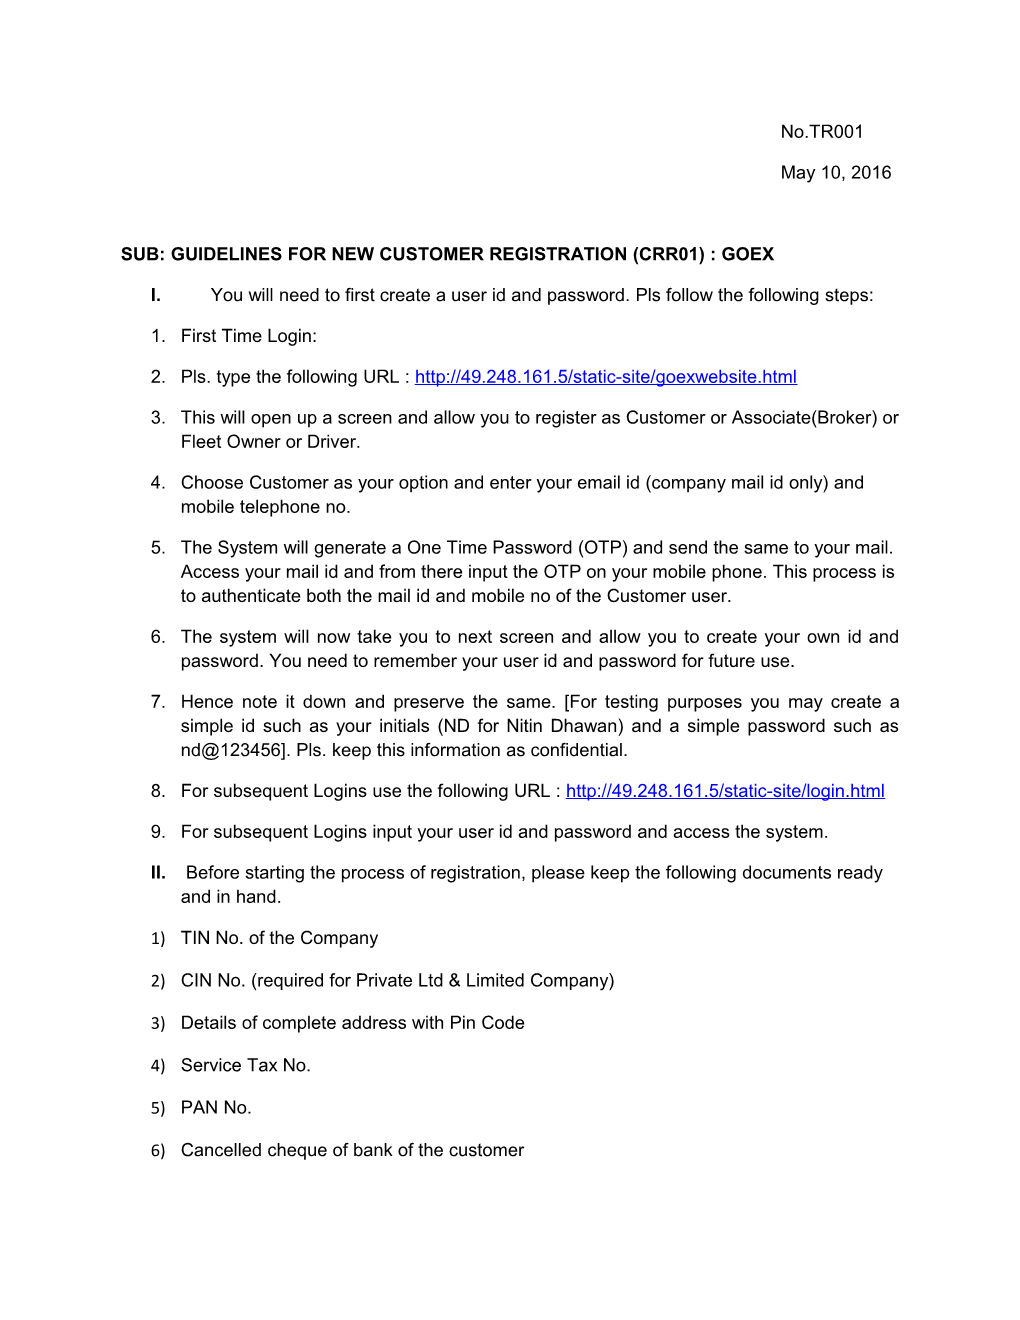 Sub: Guidelines for New Customer Registration (Crr01) : Goex